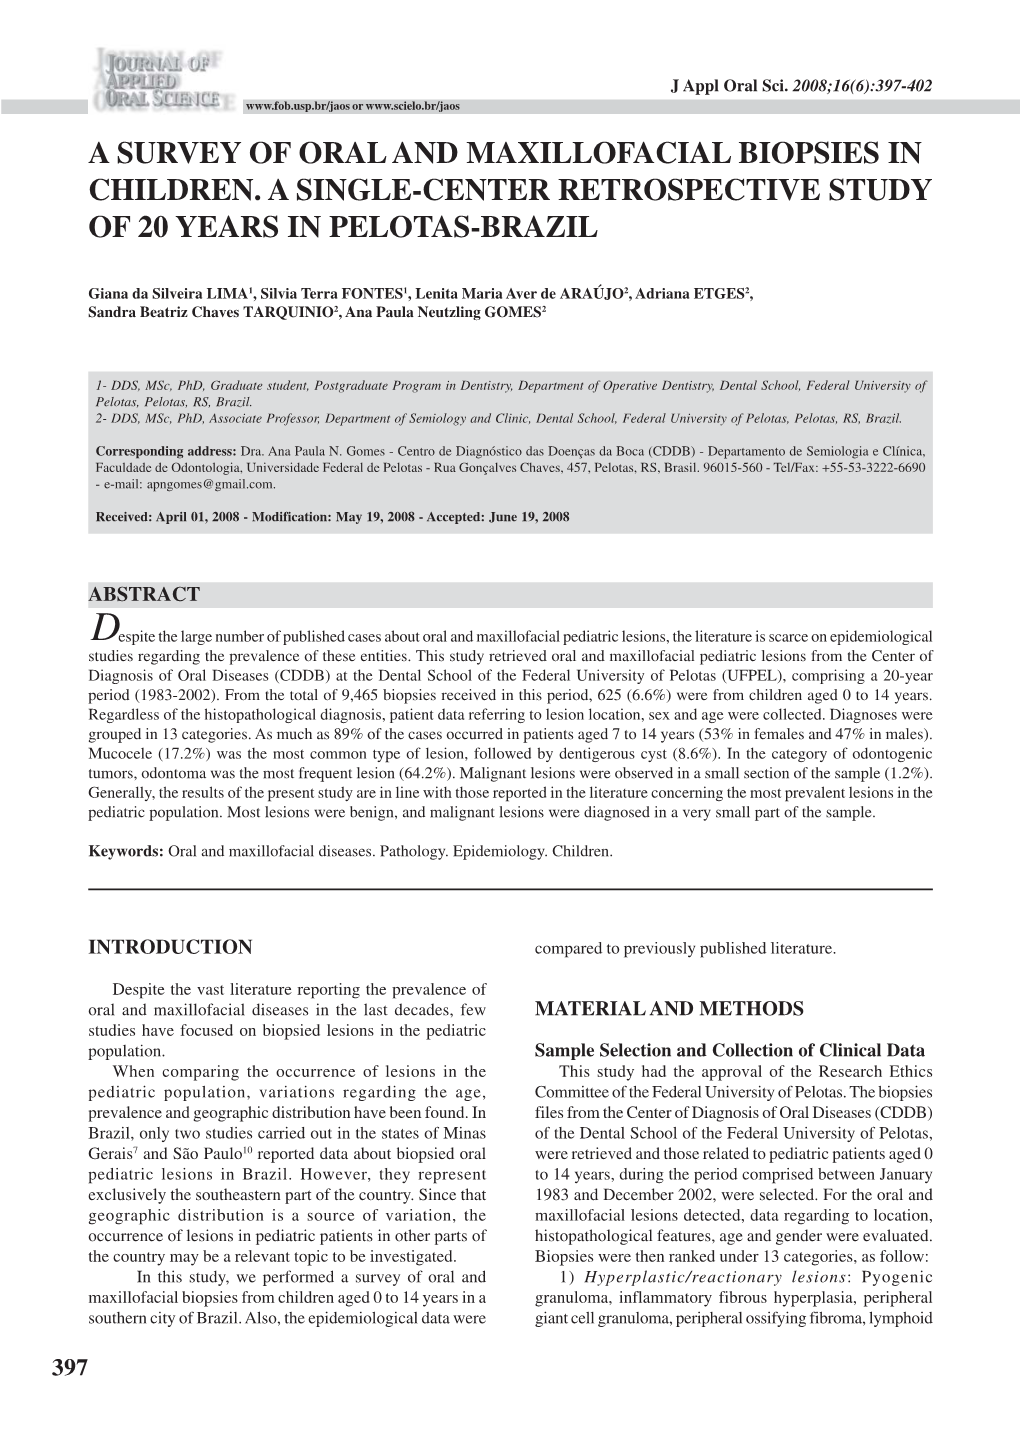 A Survey of Oral and Maxillofacial Biopsies in Children. a Single-Center Retrospective Study of 20 Years in Pelotas-Brazil